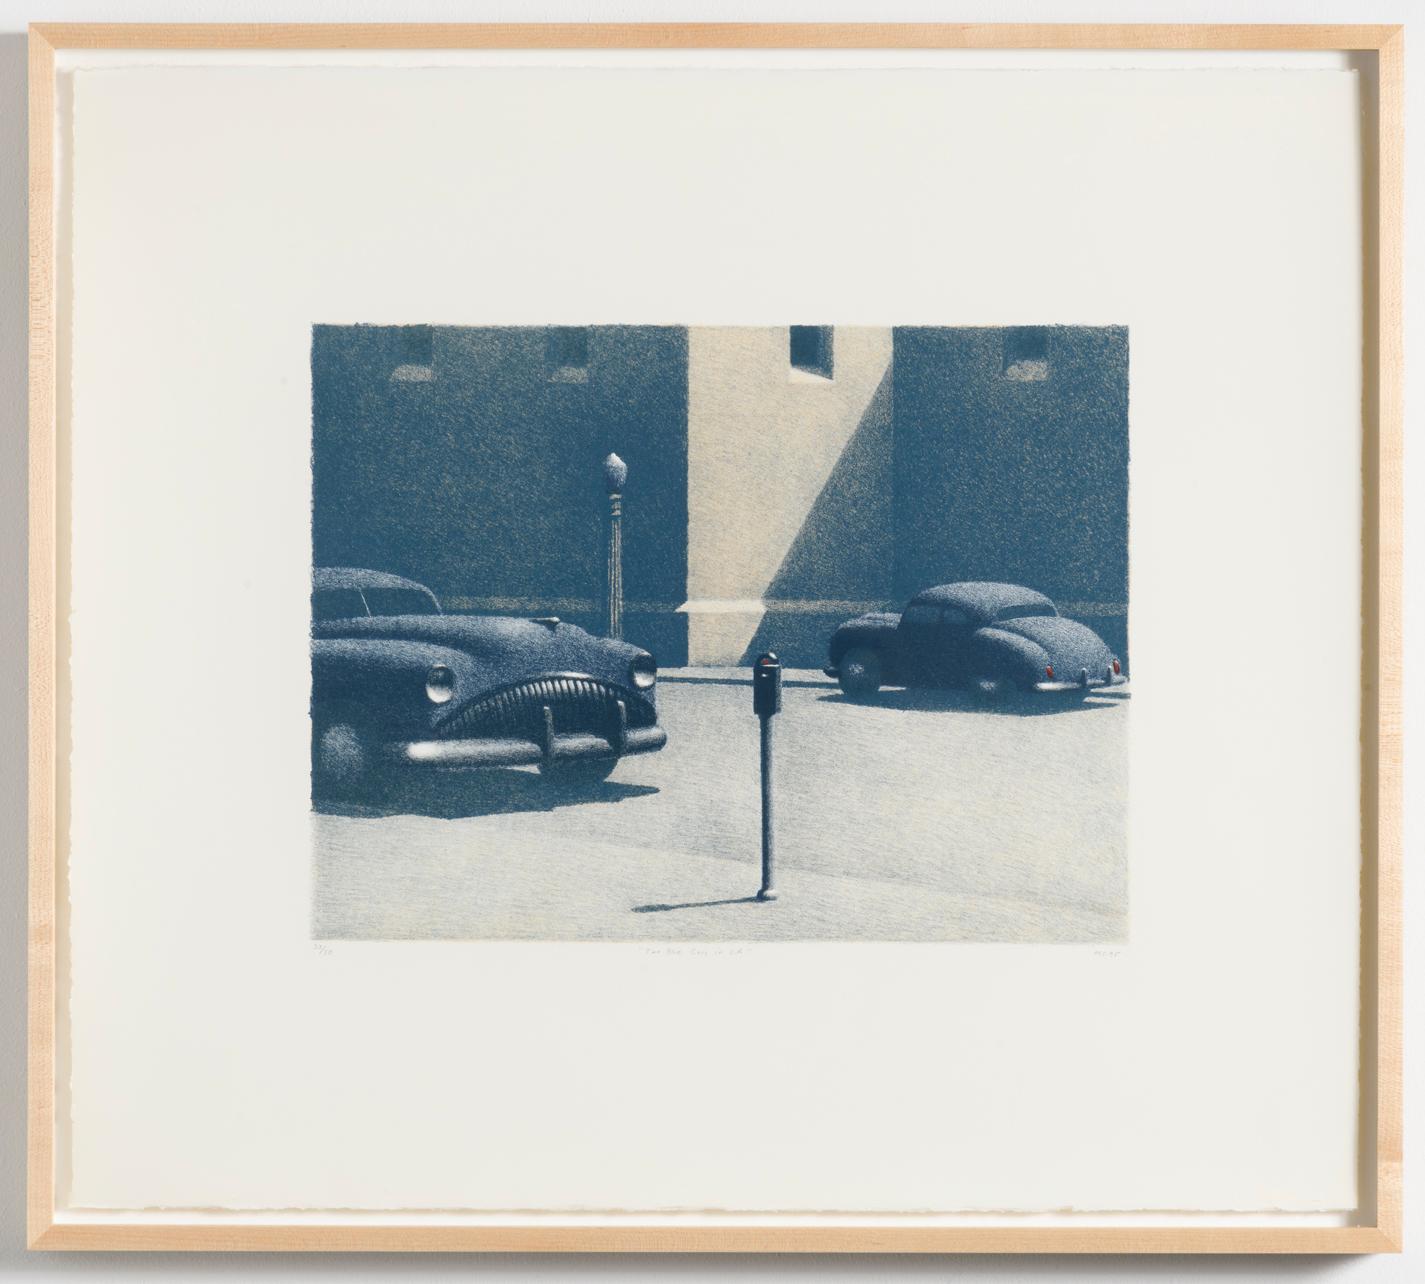 Two Blue Cars in L.A. - Print by Michael Chapman